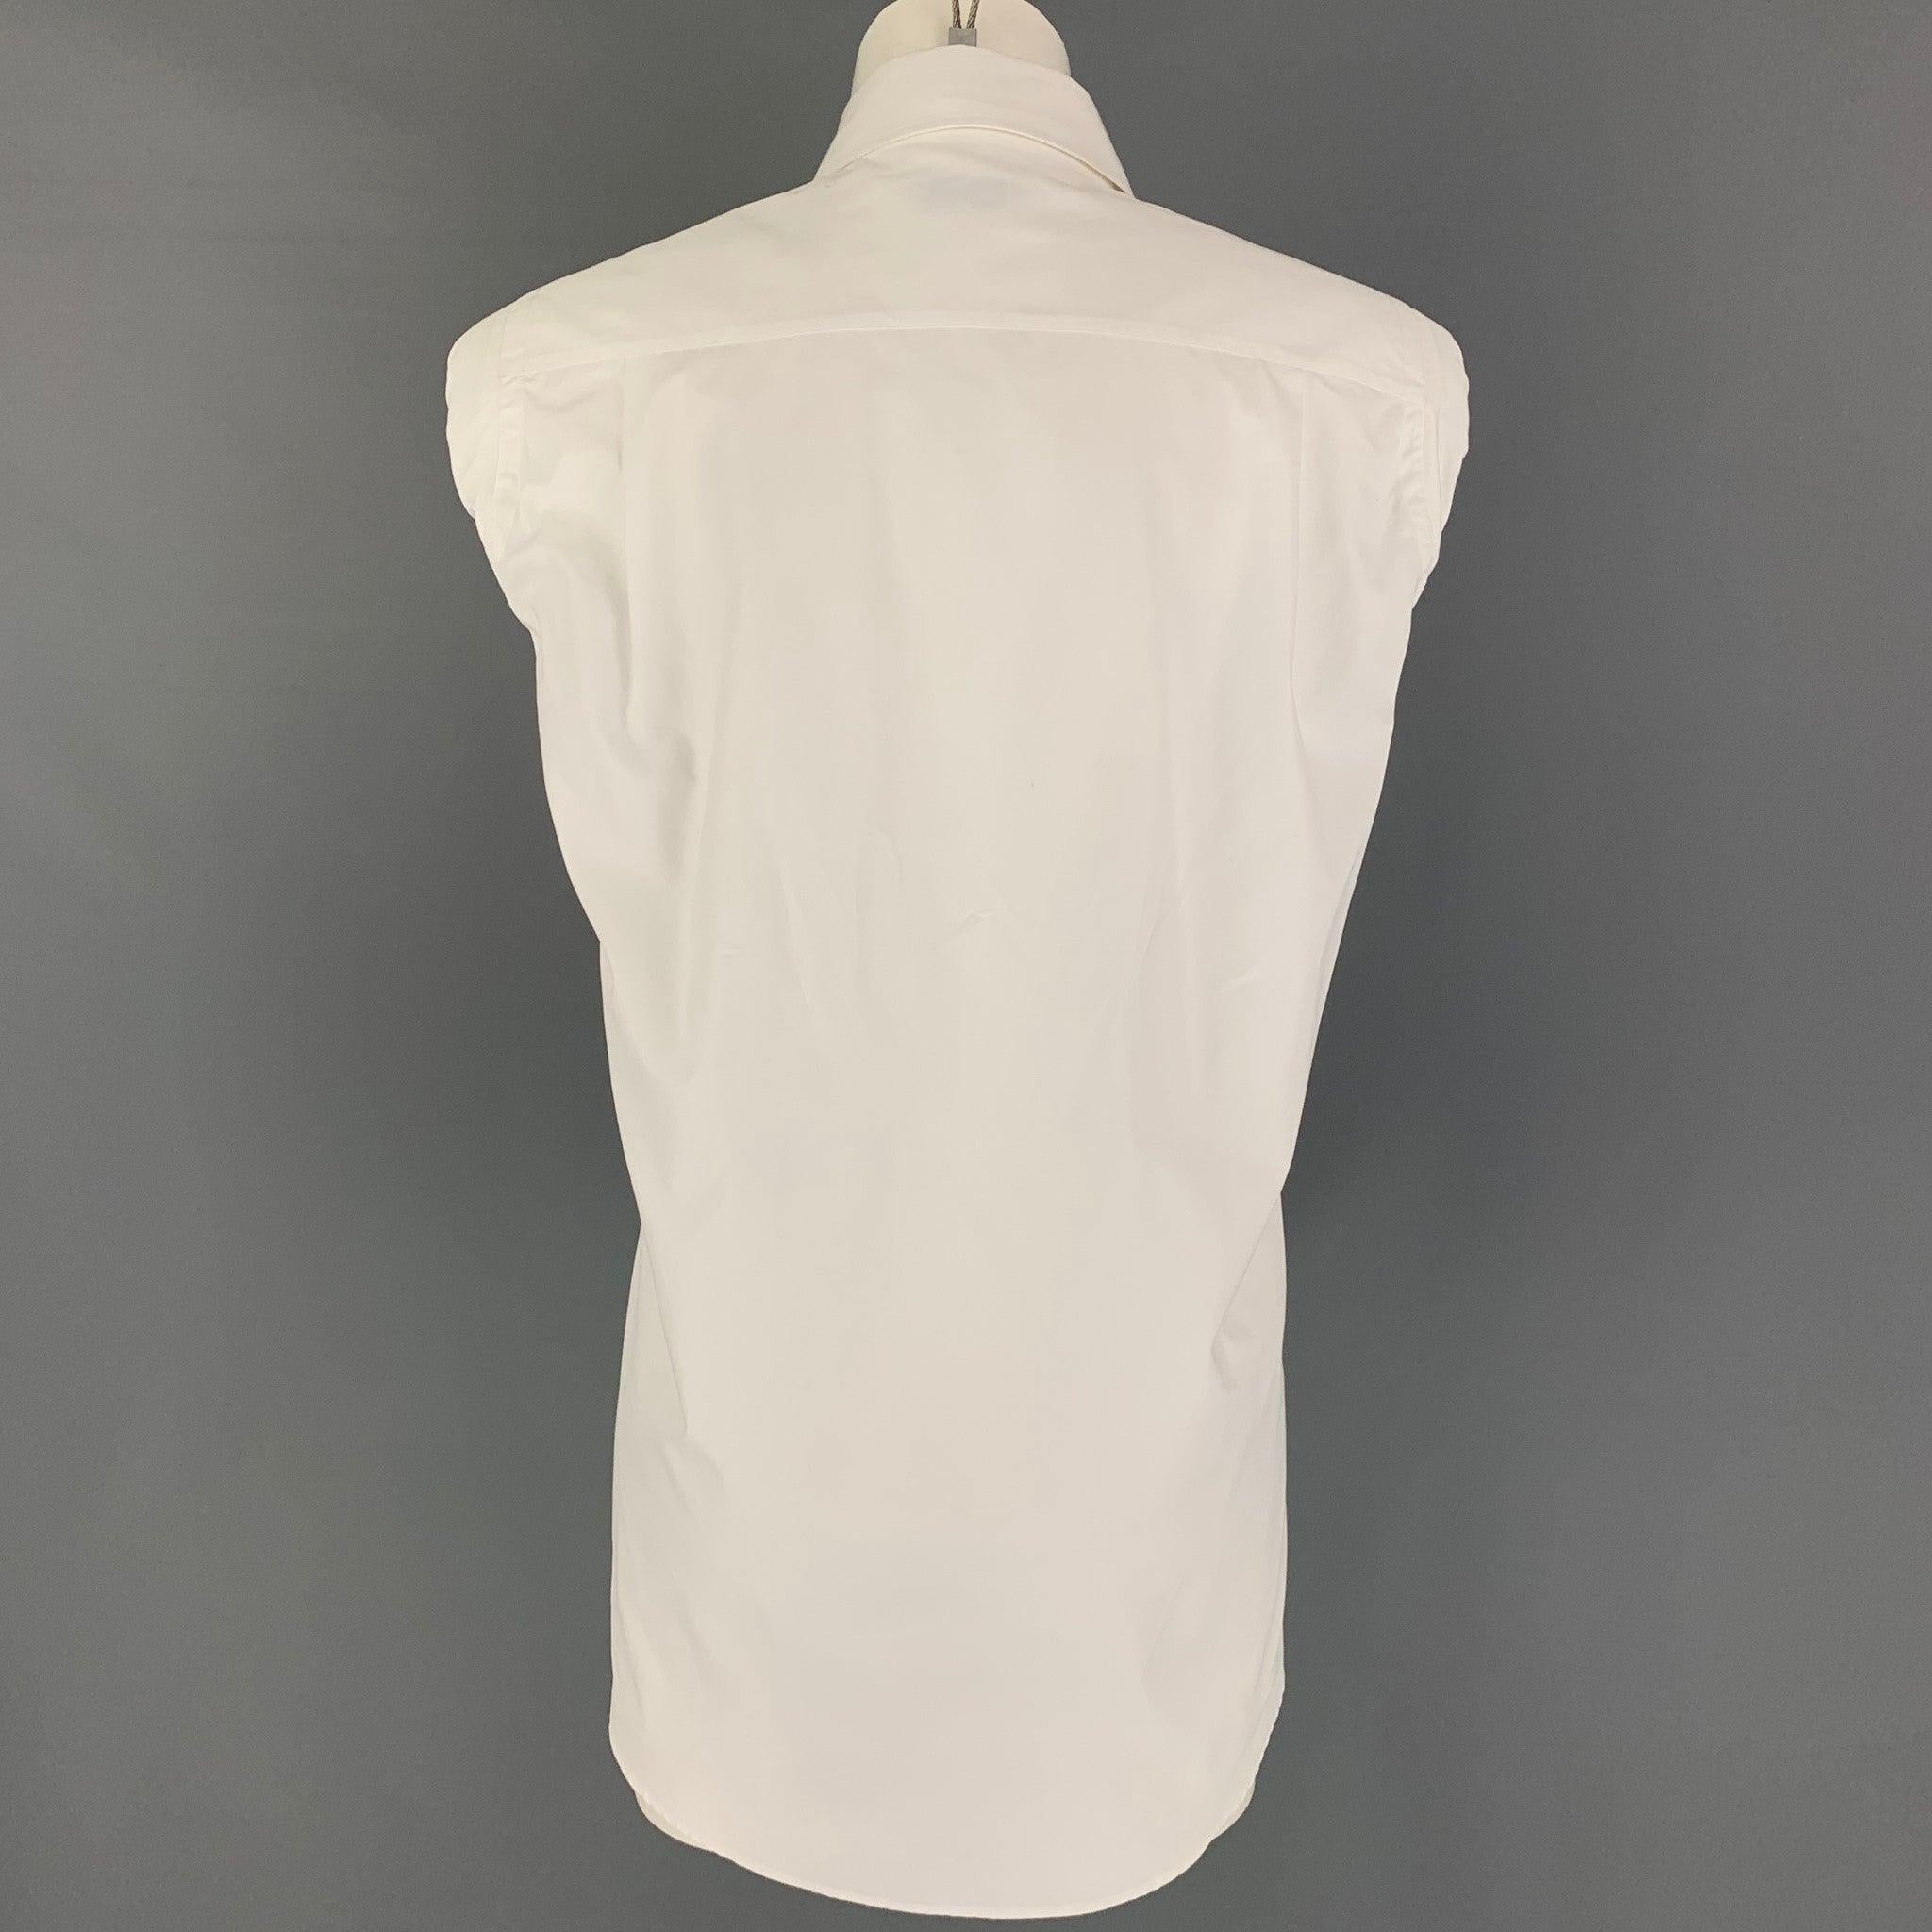 DRIES VAN NOTEN Size 6 White Cotton Sleeveless Shirt In Good Condition For Sale In San Francisco, CA